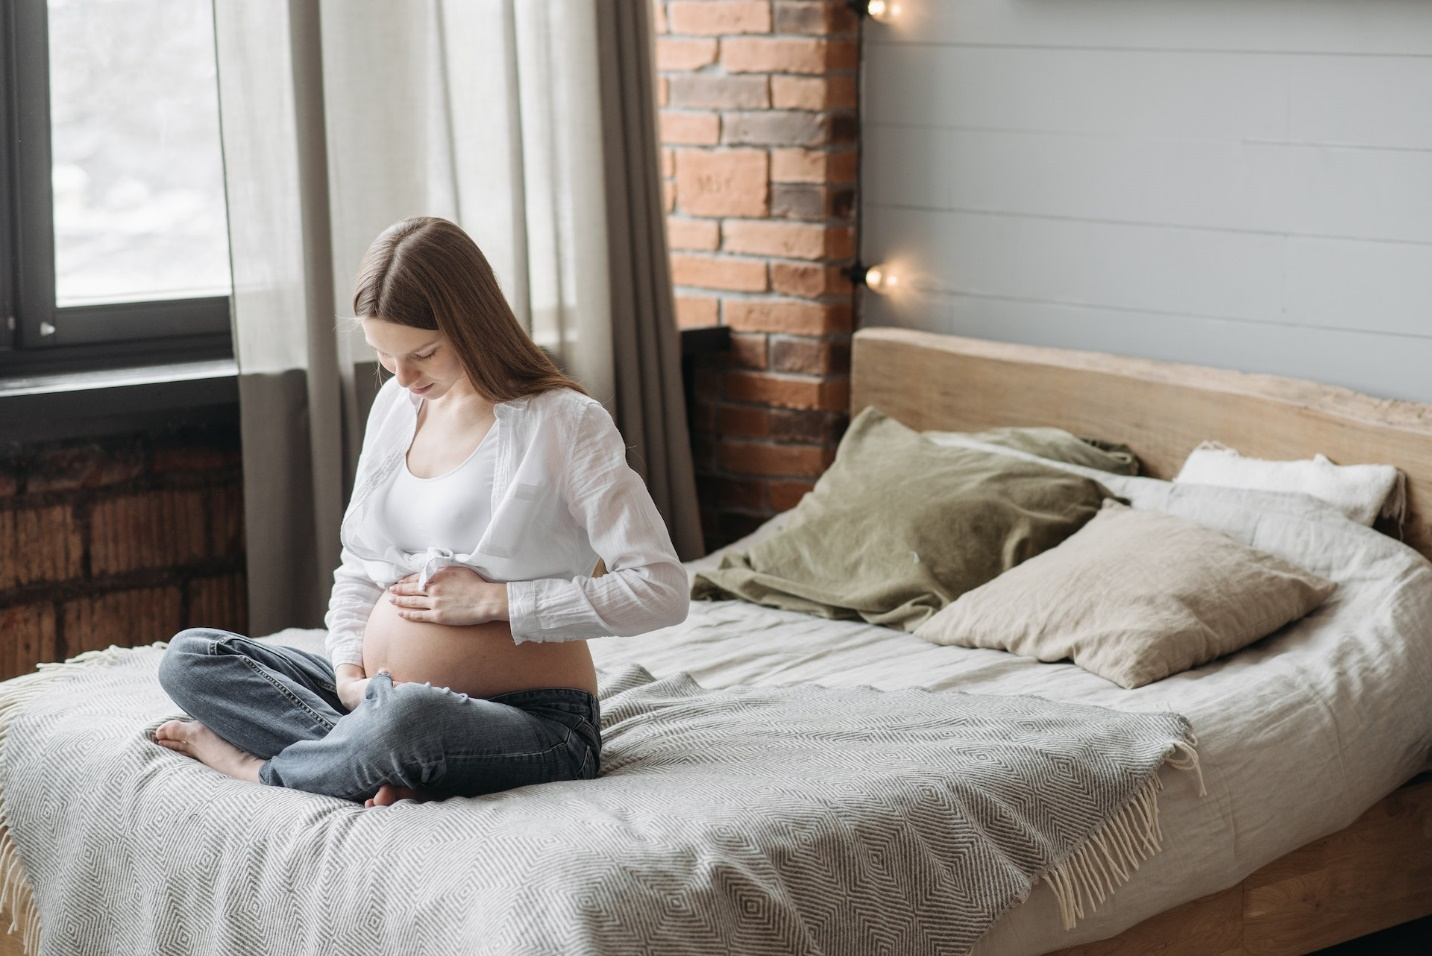 Pregnant Woman Holding Her Belly Sitting On a Bed